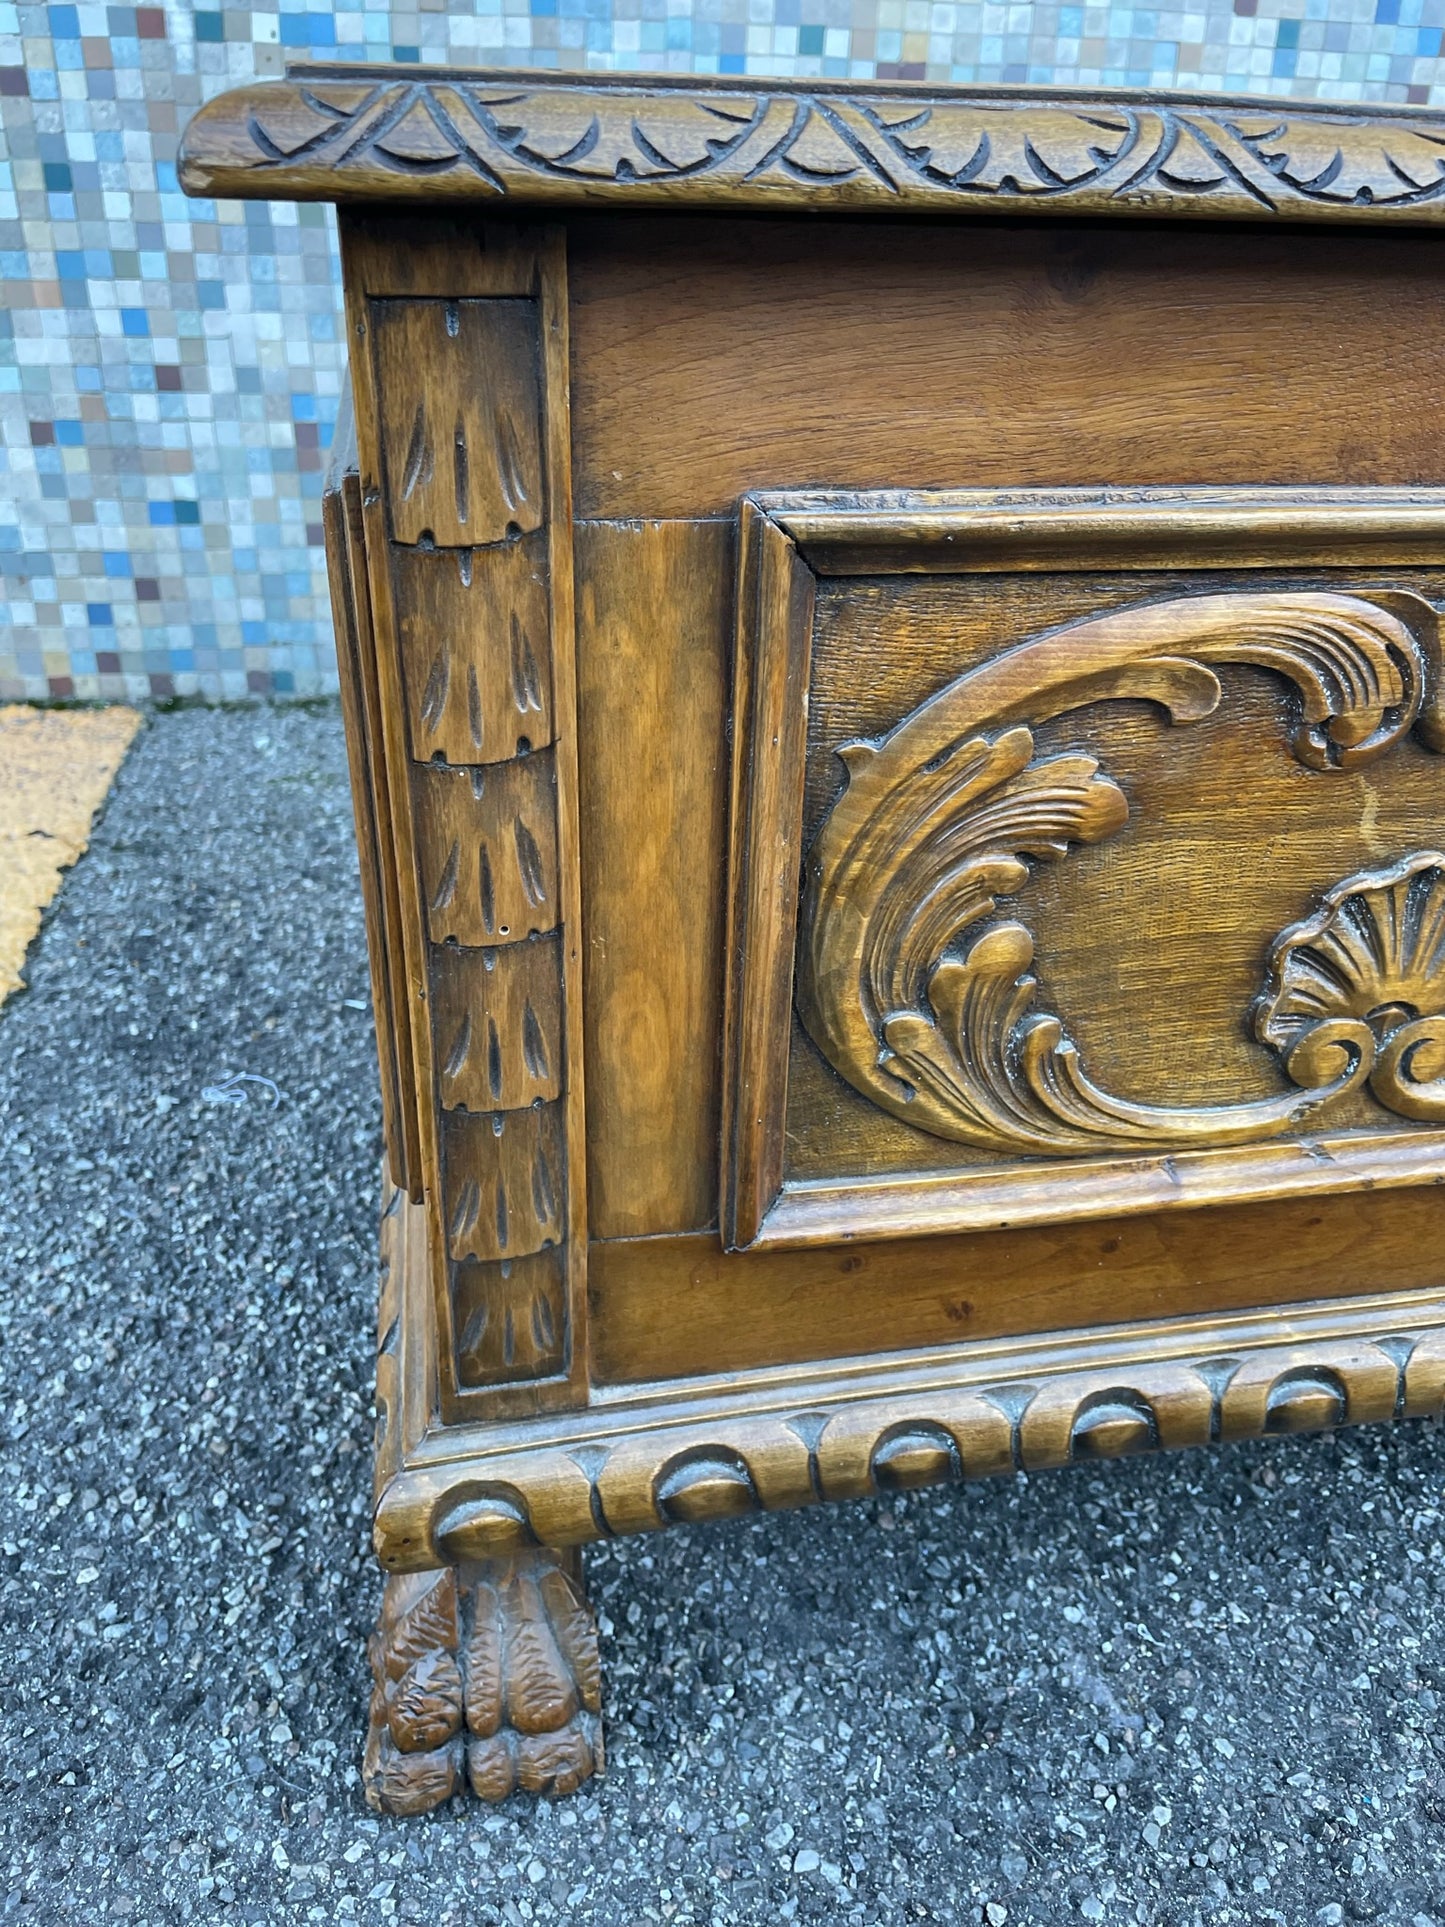 Wooden chest with lion's feet